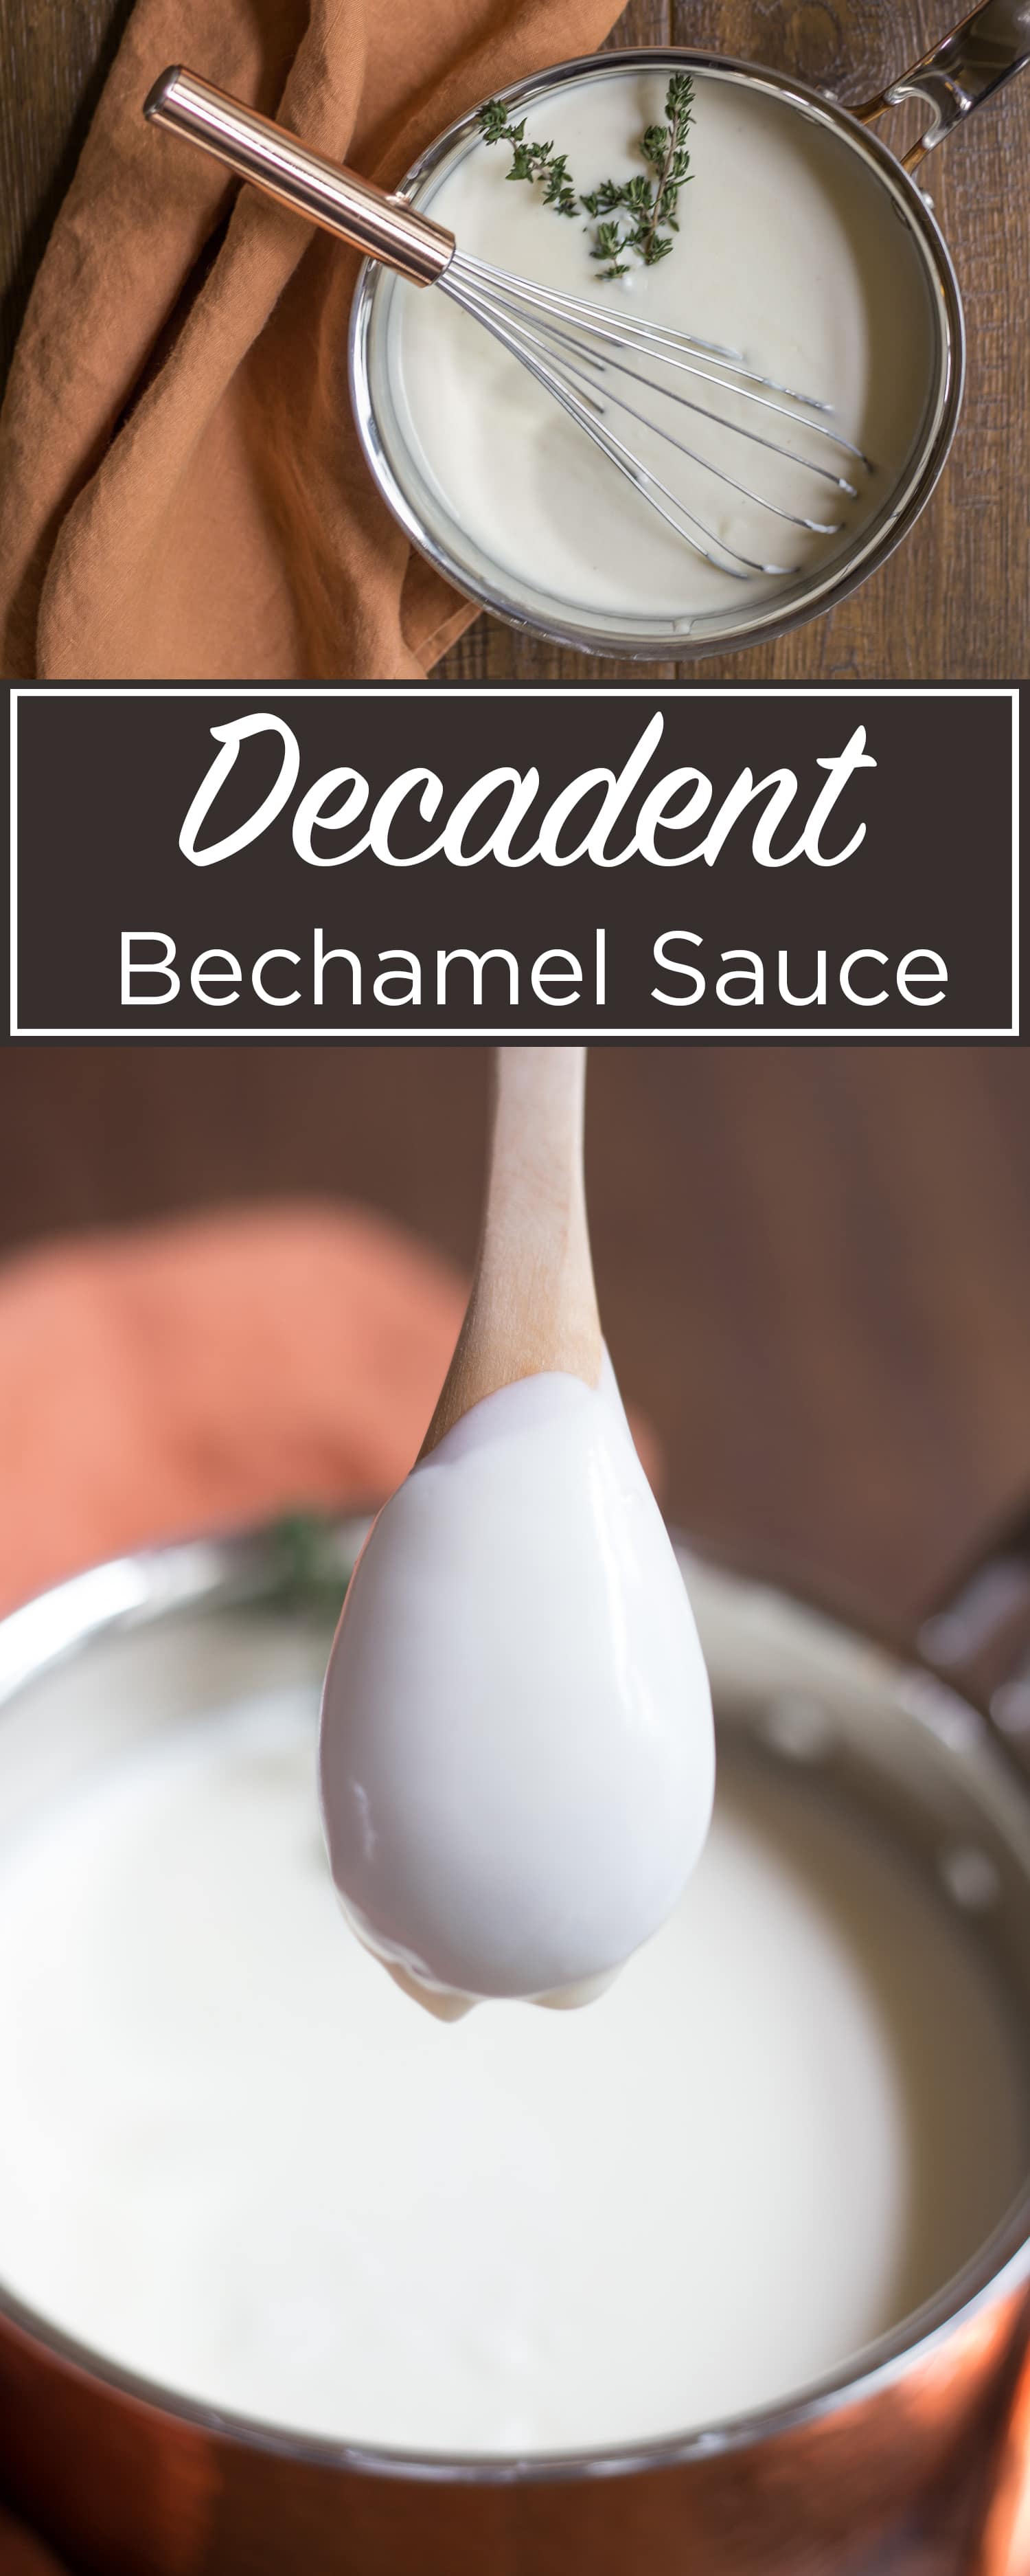 Learn to make a basic béchamel sauce at artzyfoodie.com